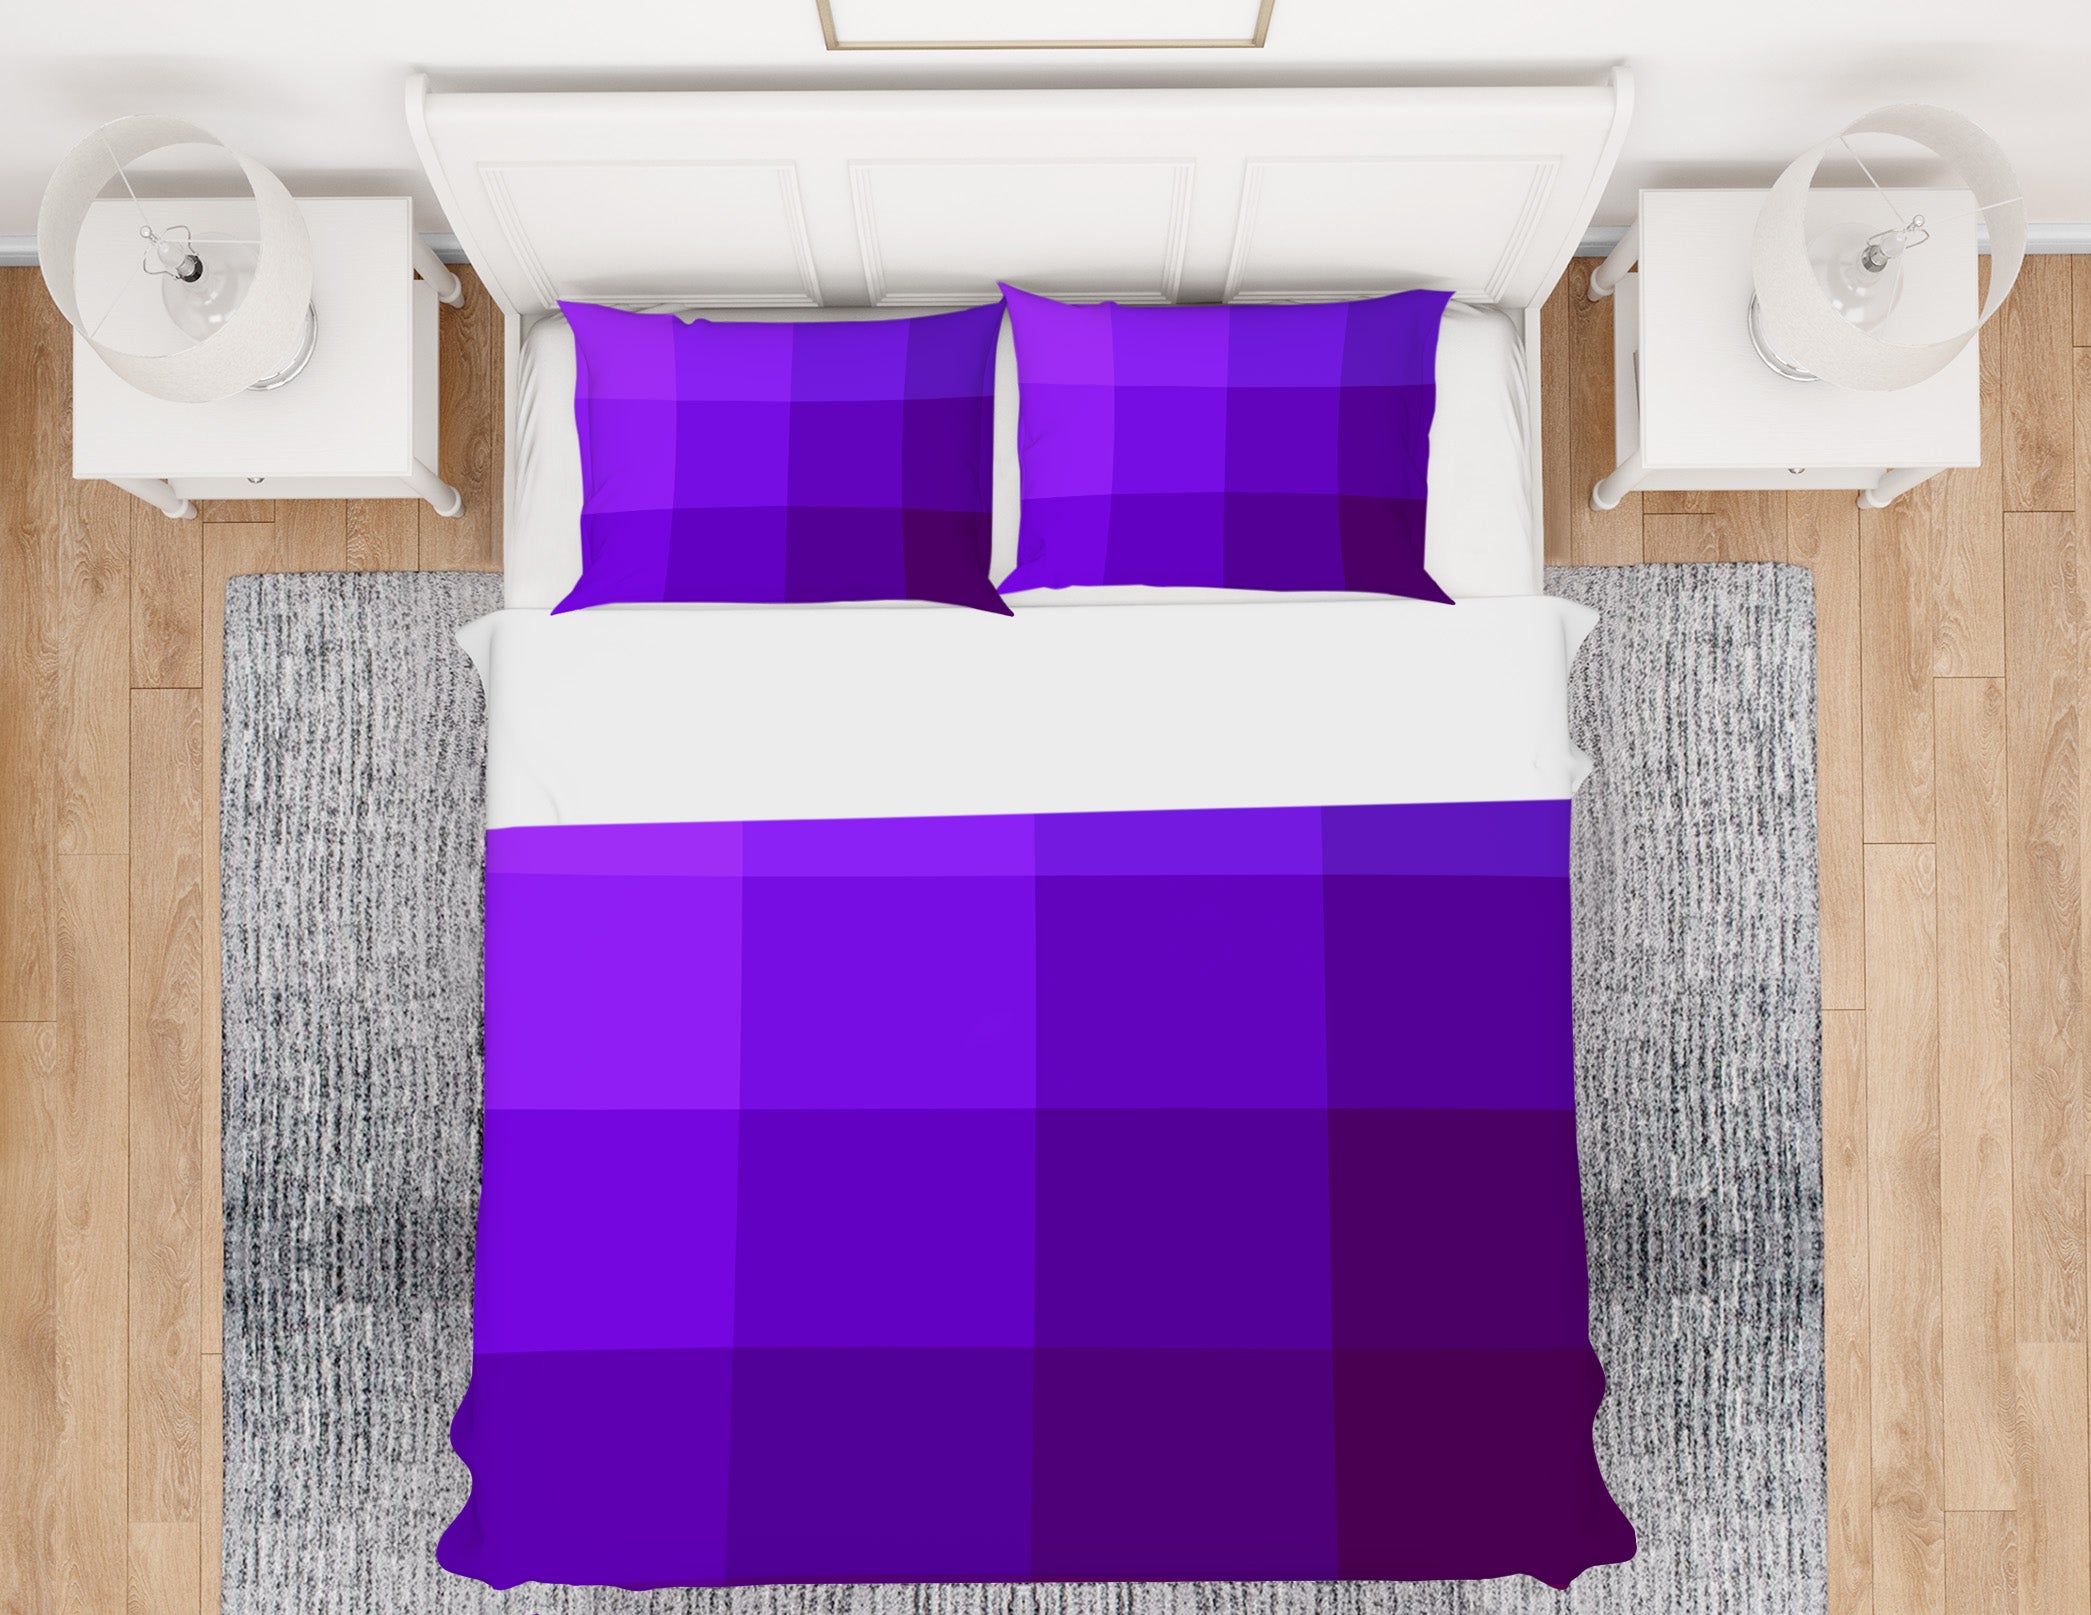 3D Purple 70178 Shandra Smith Bedding Bed Pillowcases Quilt